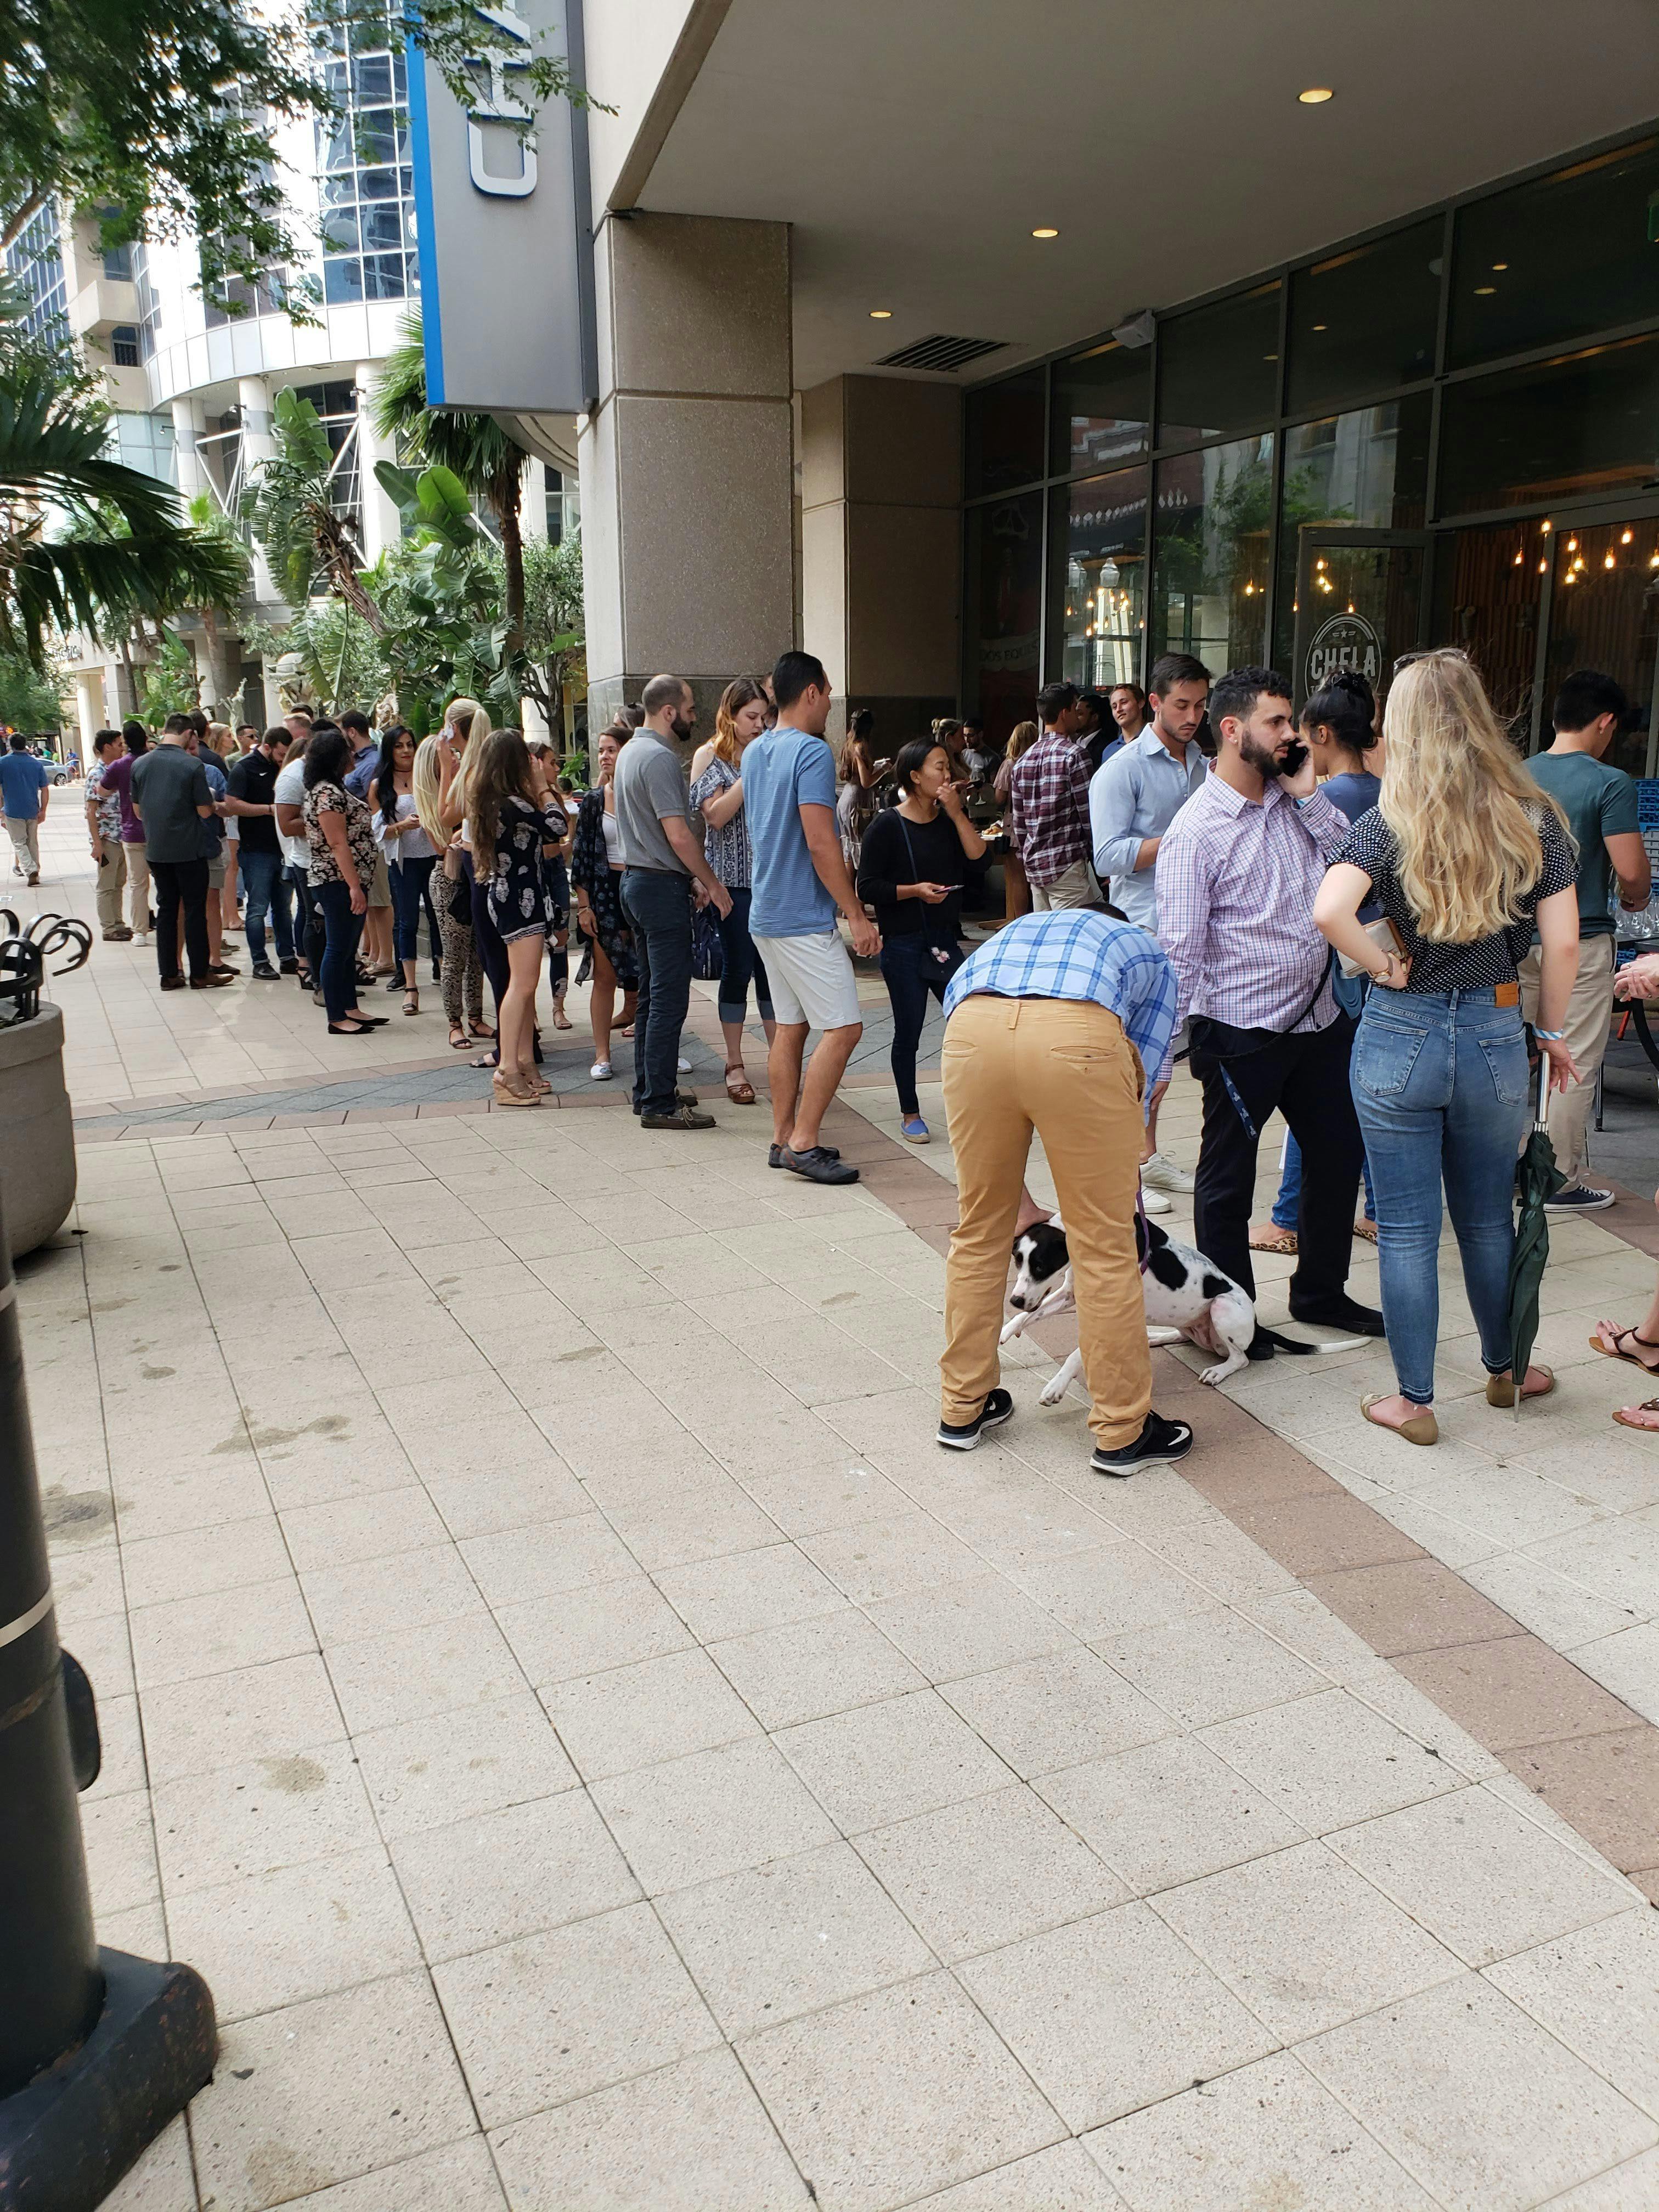 Free stock photo of Downtown Orlando, people in line, Wine down